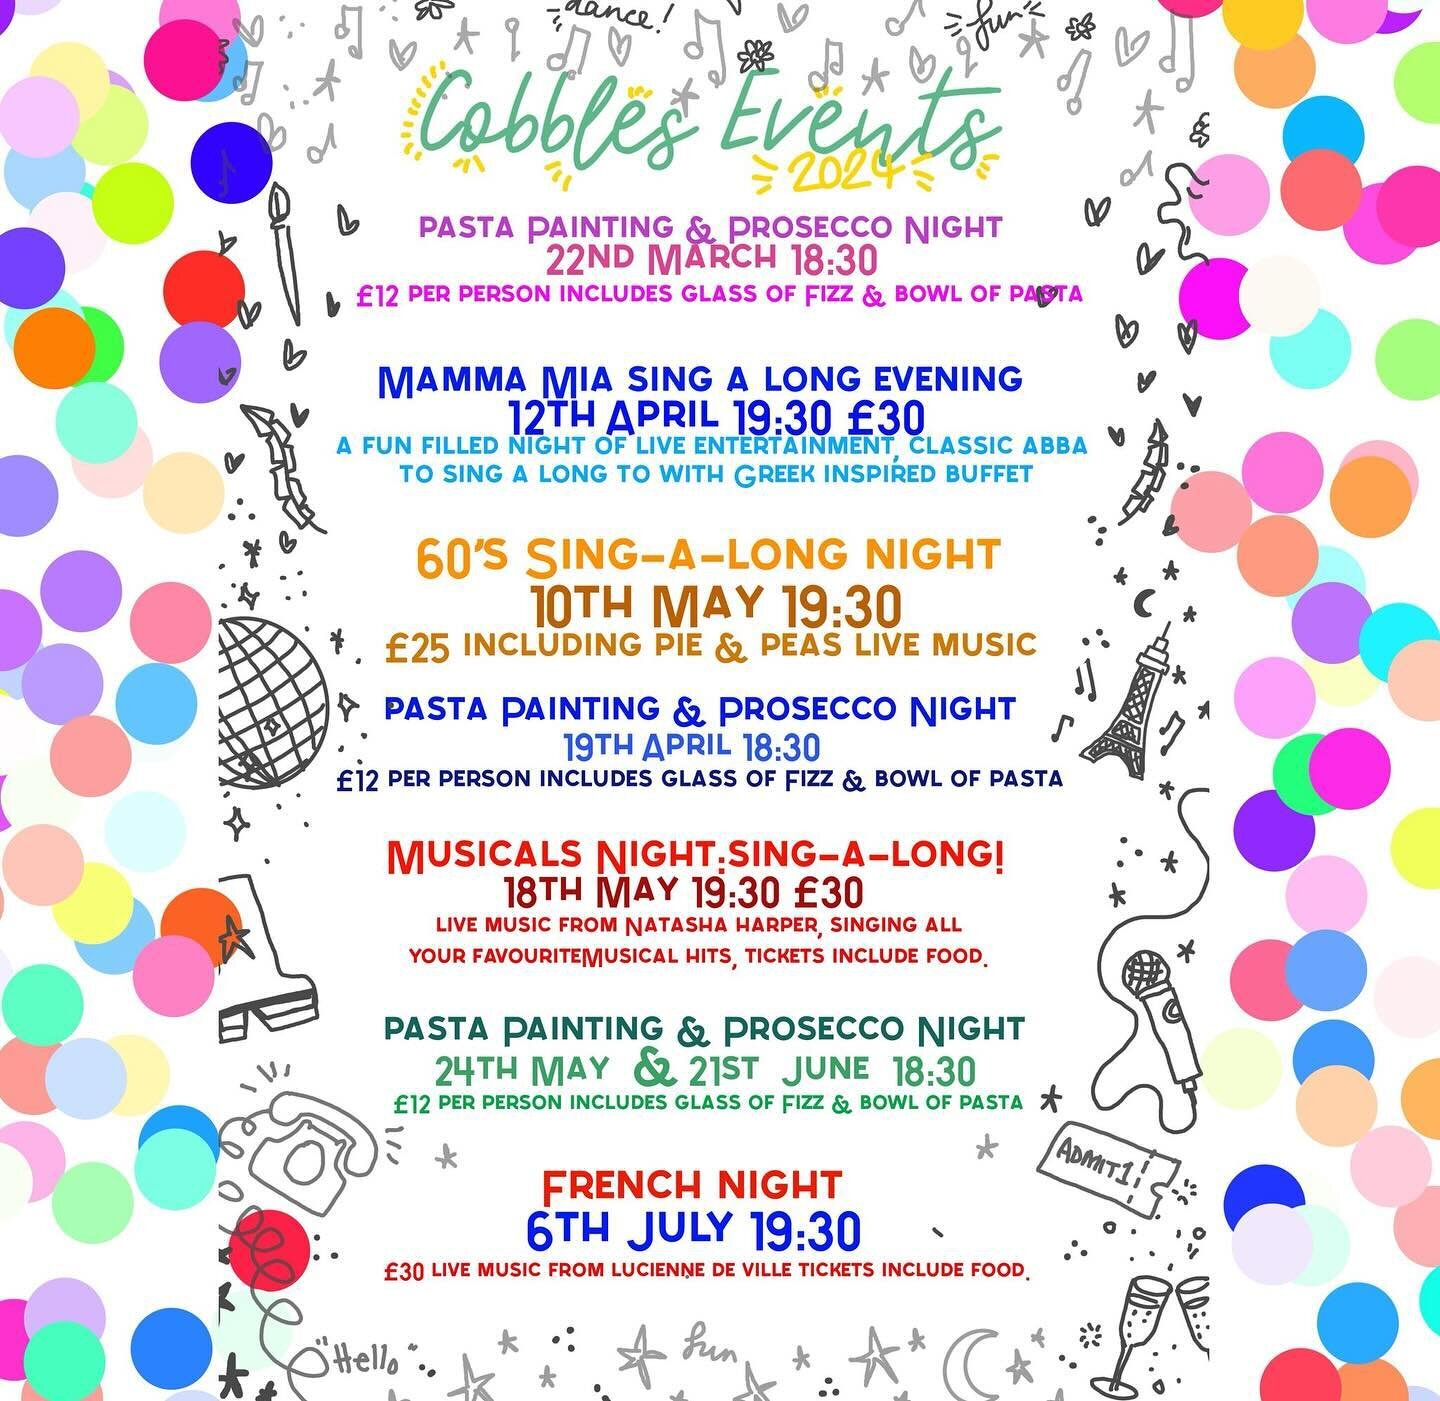 We&rsquo;ve got an exciting line up of events at Cobbles and Clay in the coming months. 🎨🕺✨

To book any of these events, please call us on 01535 958961. We do not take bookings through social media. Thank you! ✨